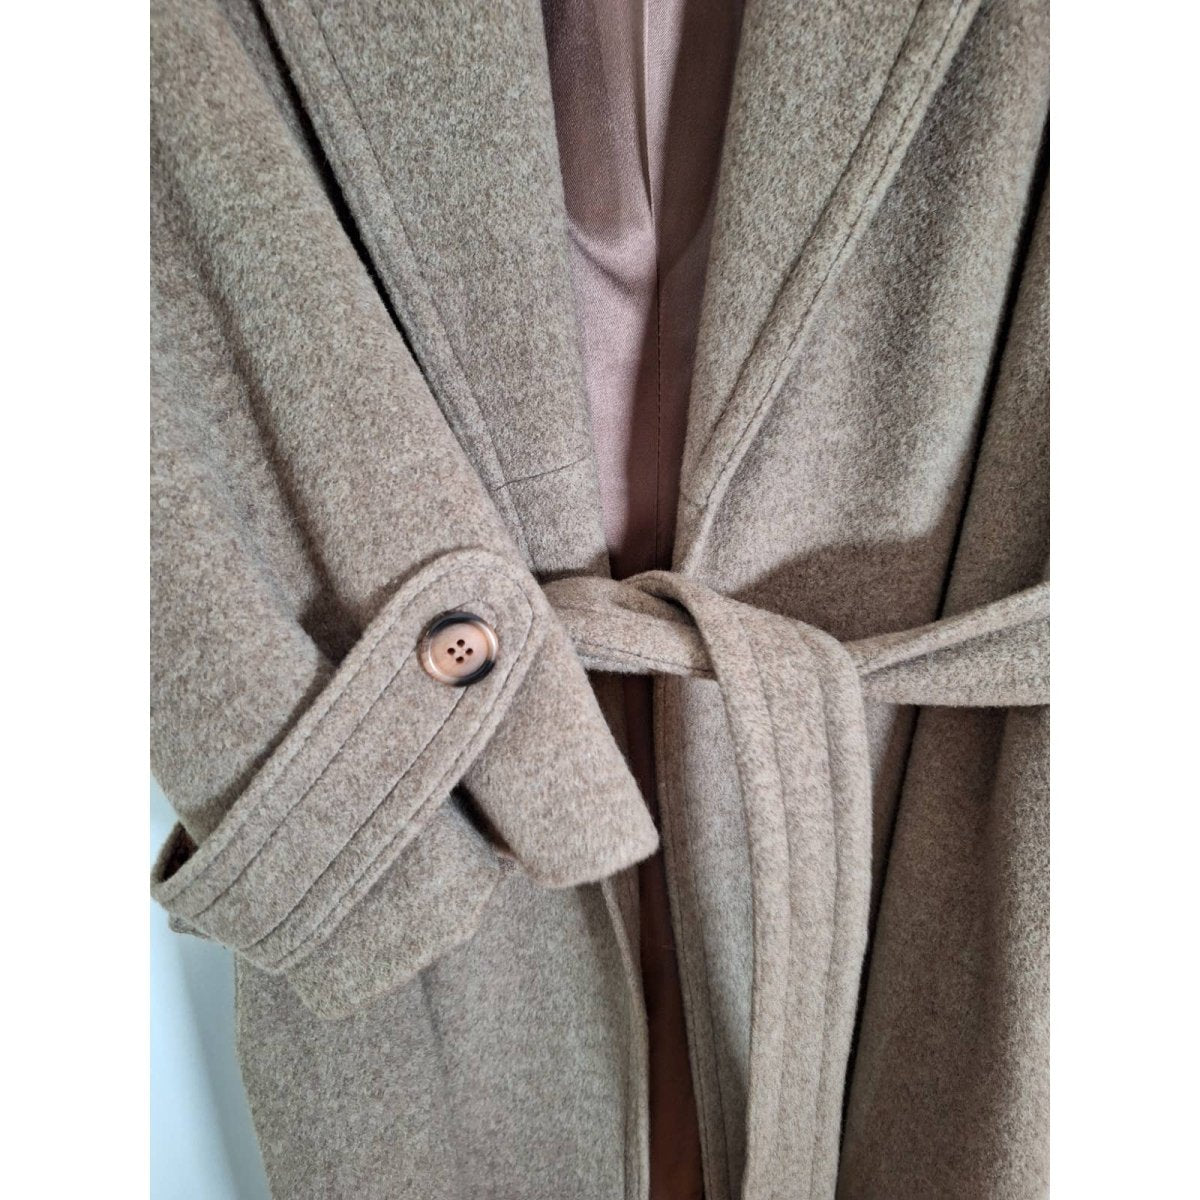 Vintage 70s/80s Taupe 100% Cashmere Coat Size S/M - themallvintage The Mall Vintage